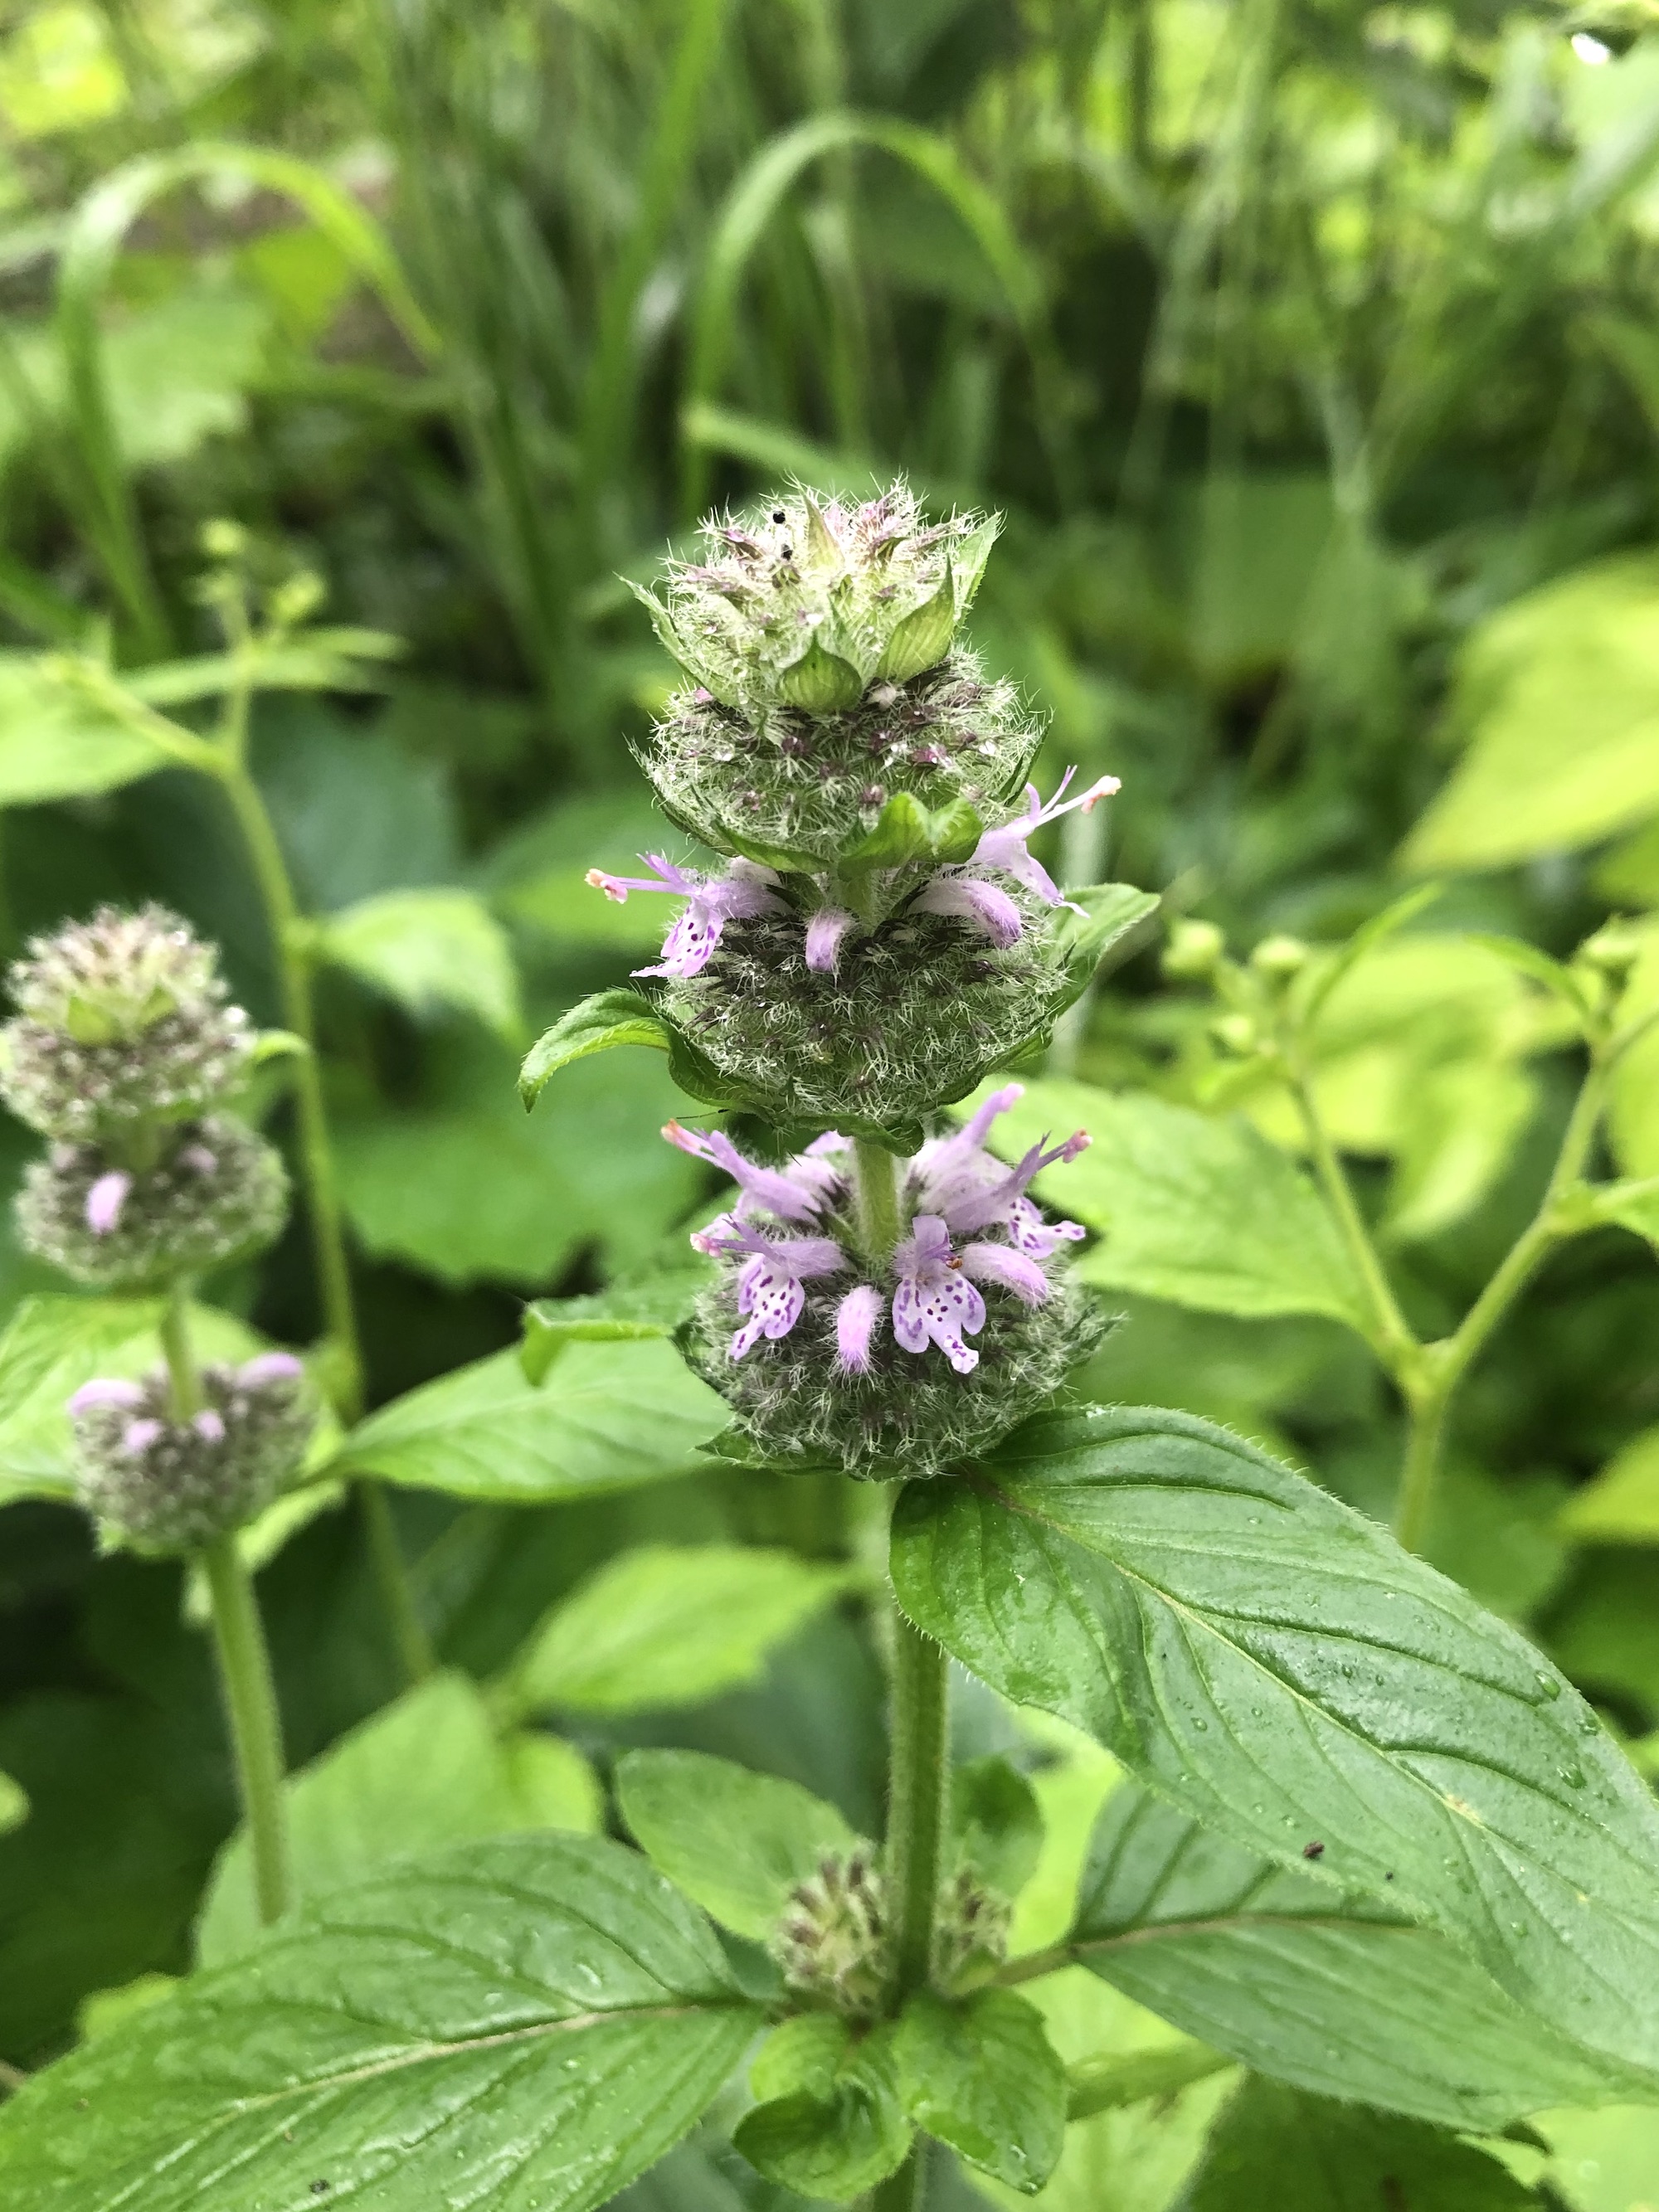 Downy Pagoda-plant near Council Ring in Oak Savana in Madison, Wisconsin on June 12, 2022.